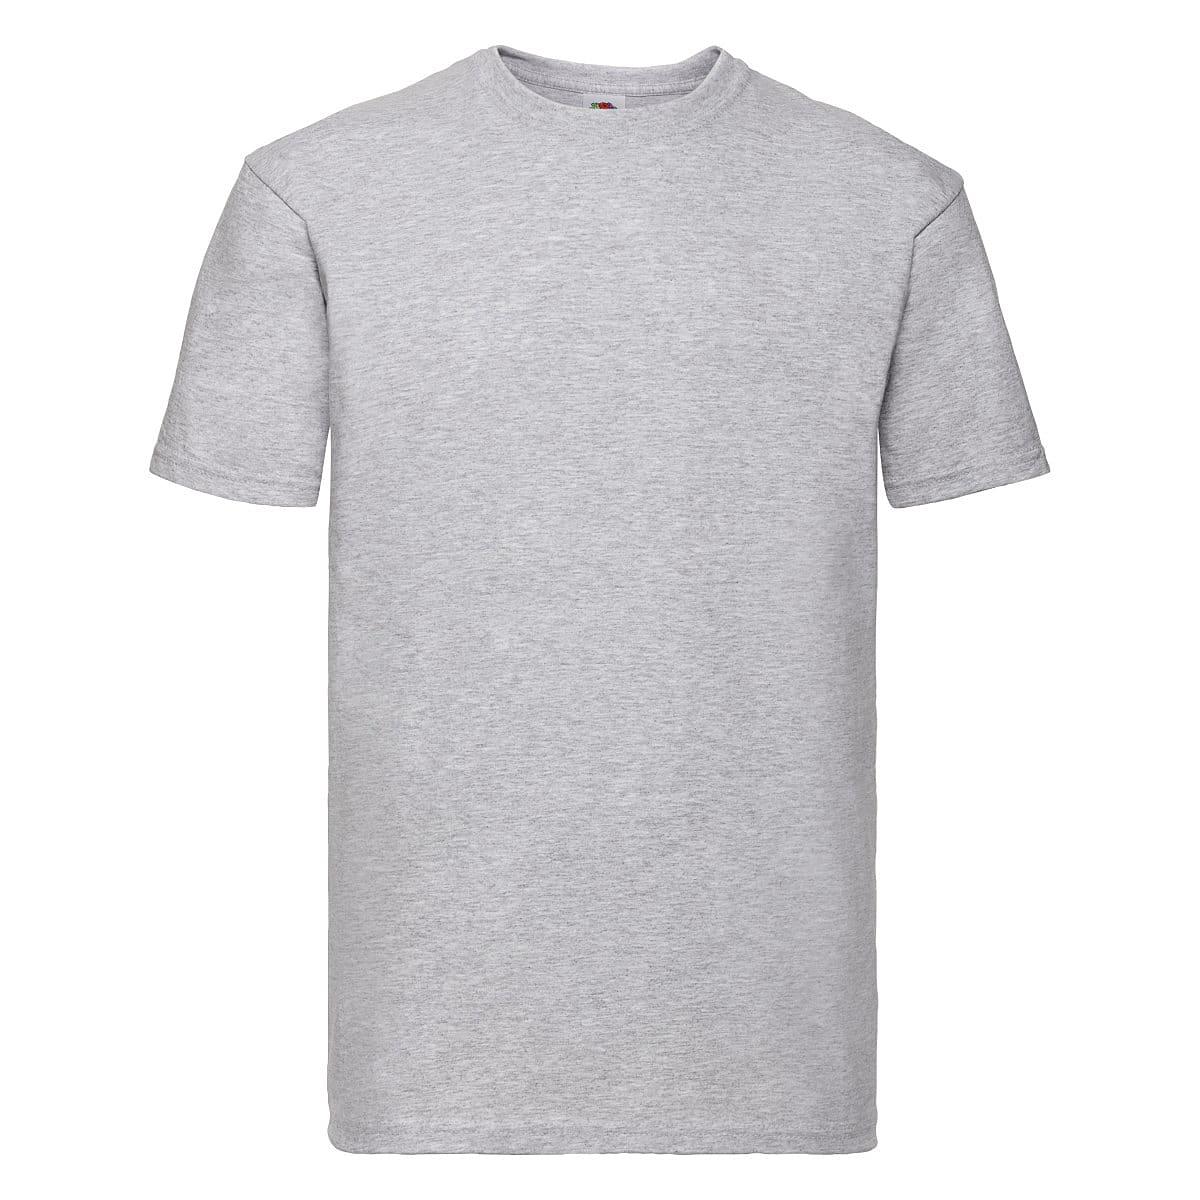 Fruit Of The Loom Super Premium T-Shirt in Heather Grey (Product Code: 61044)